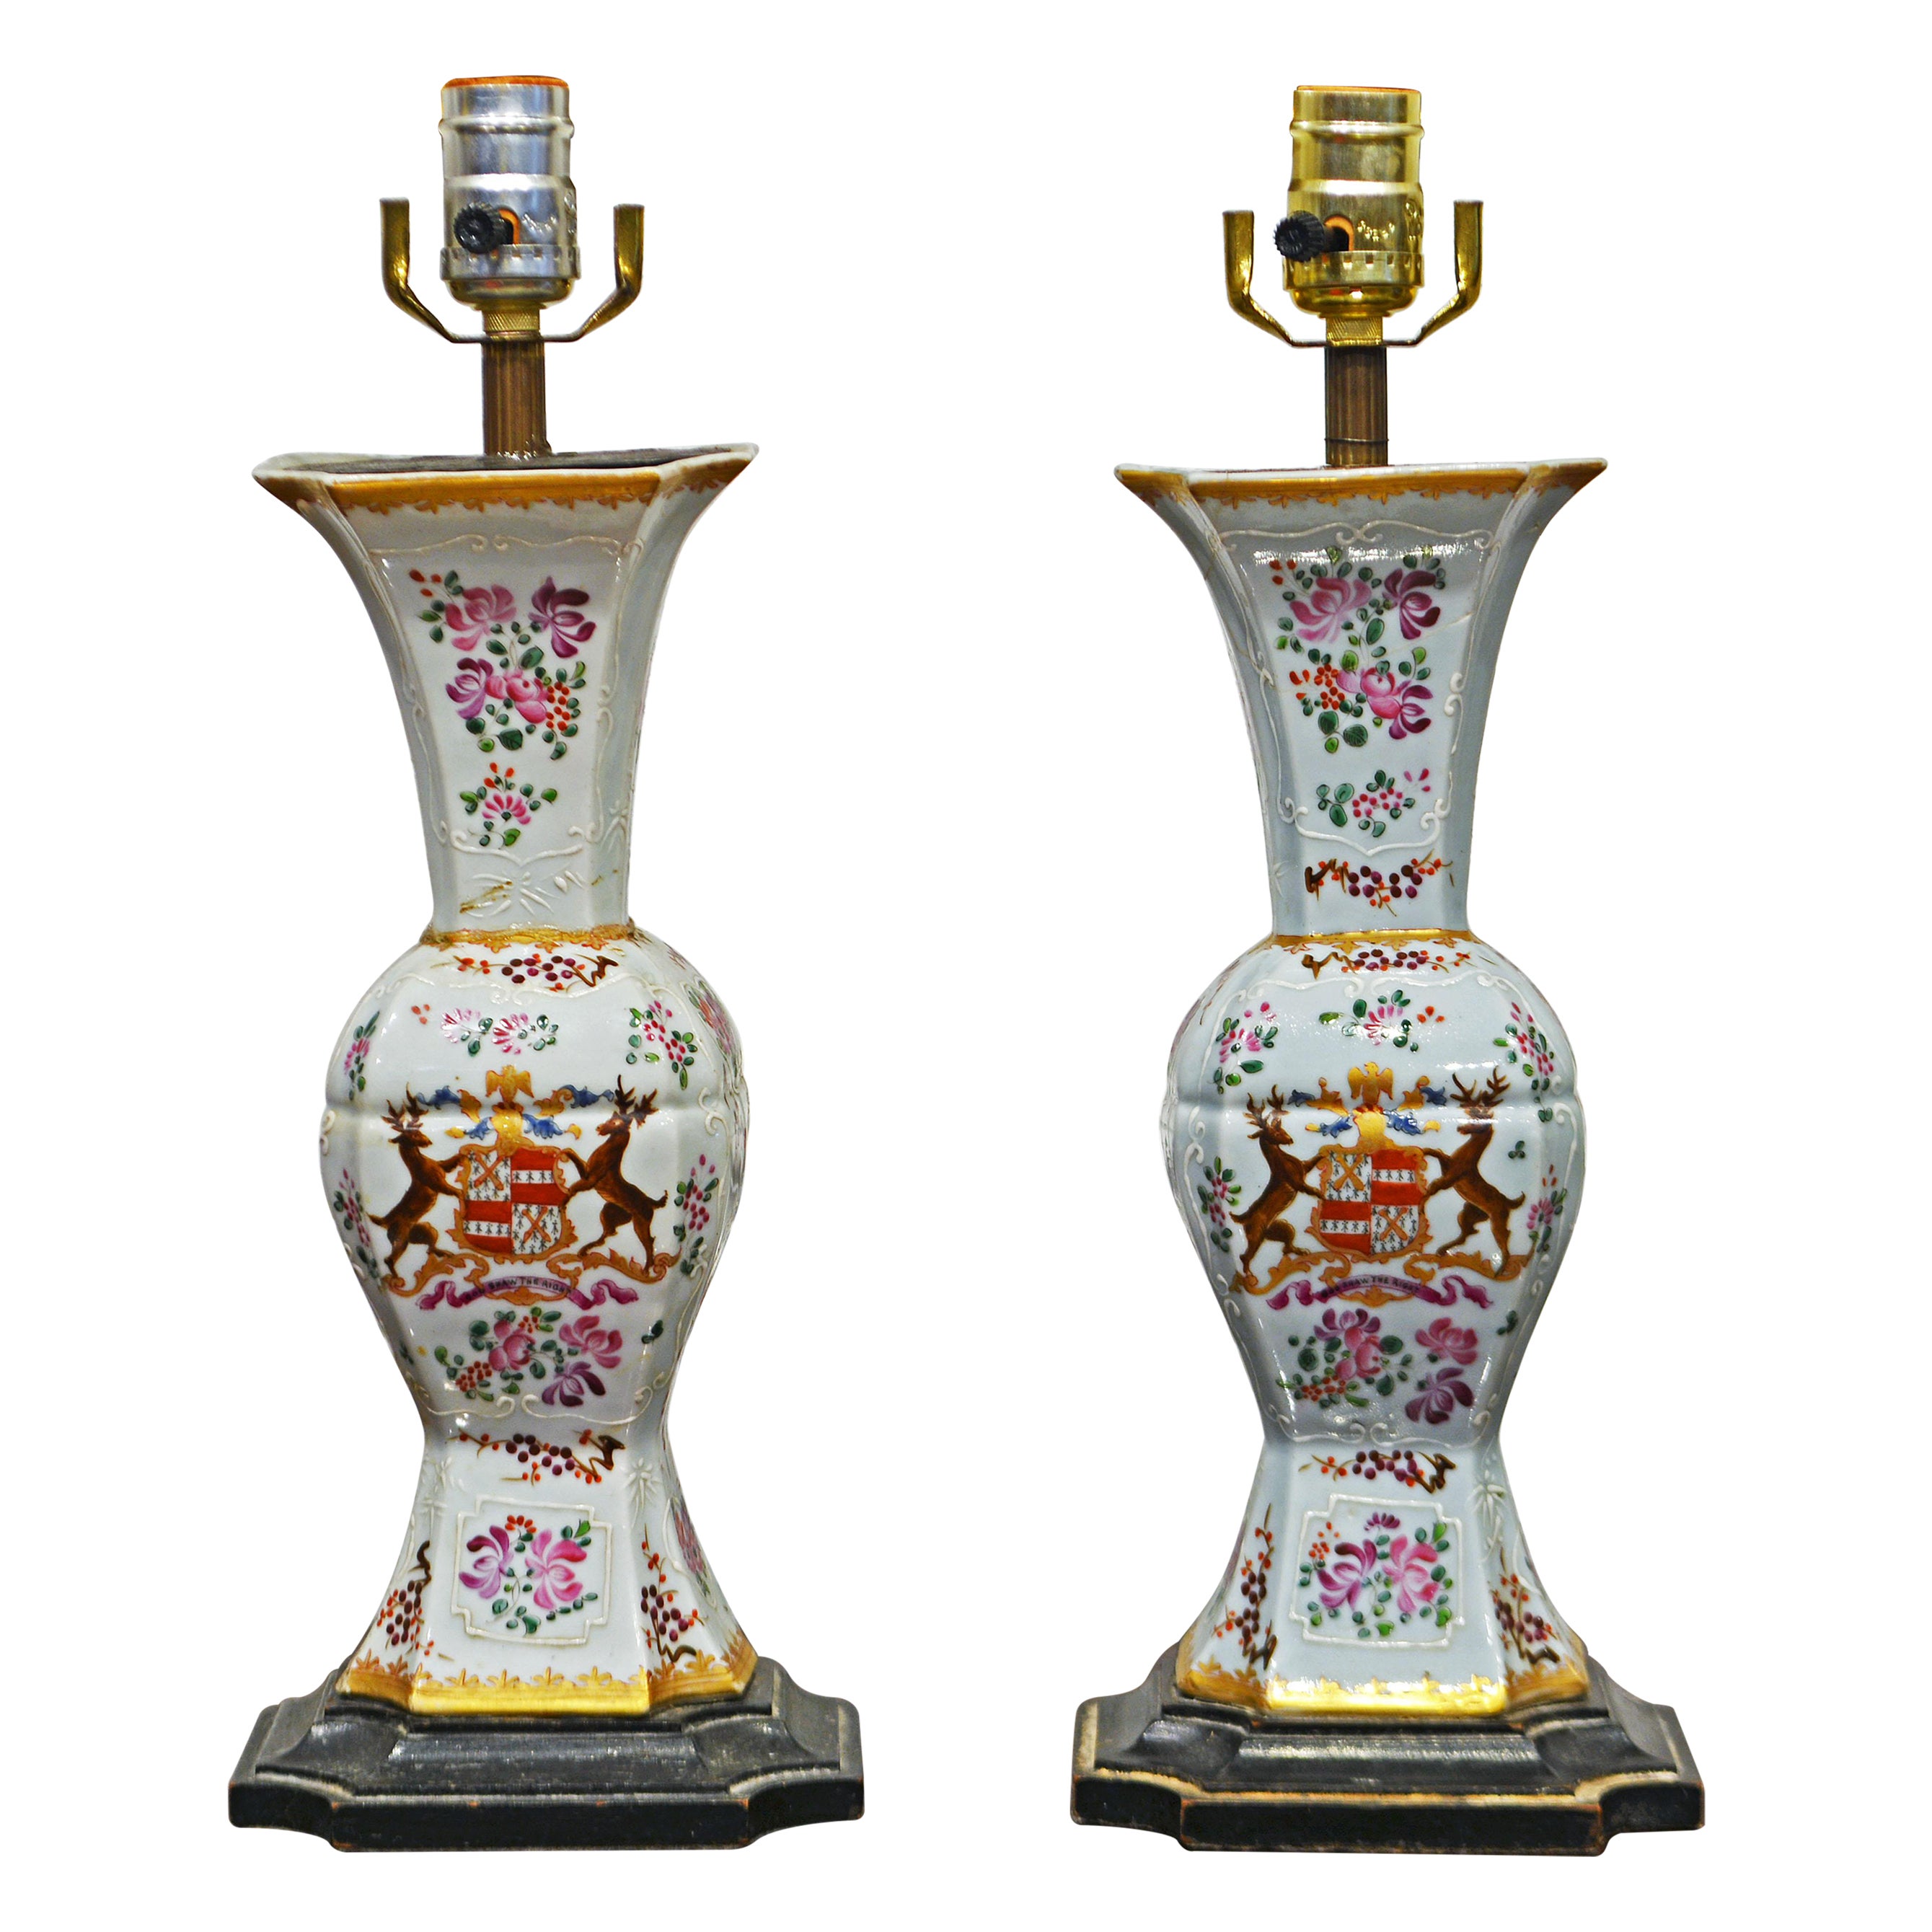 Pair of 19th C. Old Paris Baluster Form Table Lamps in the Famille Rose Taste